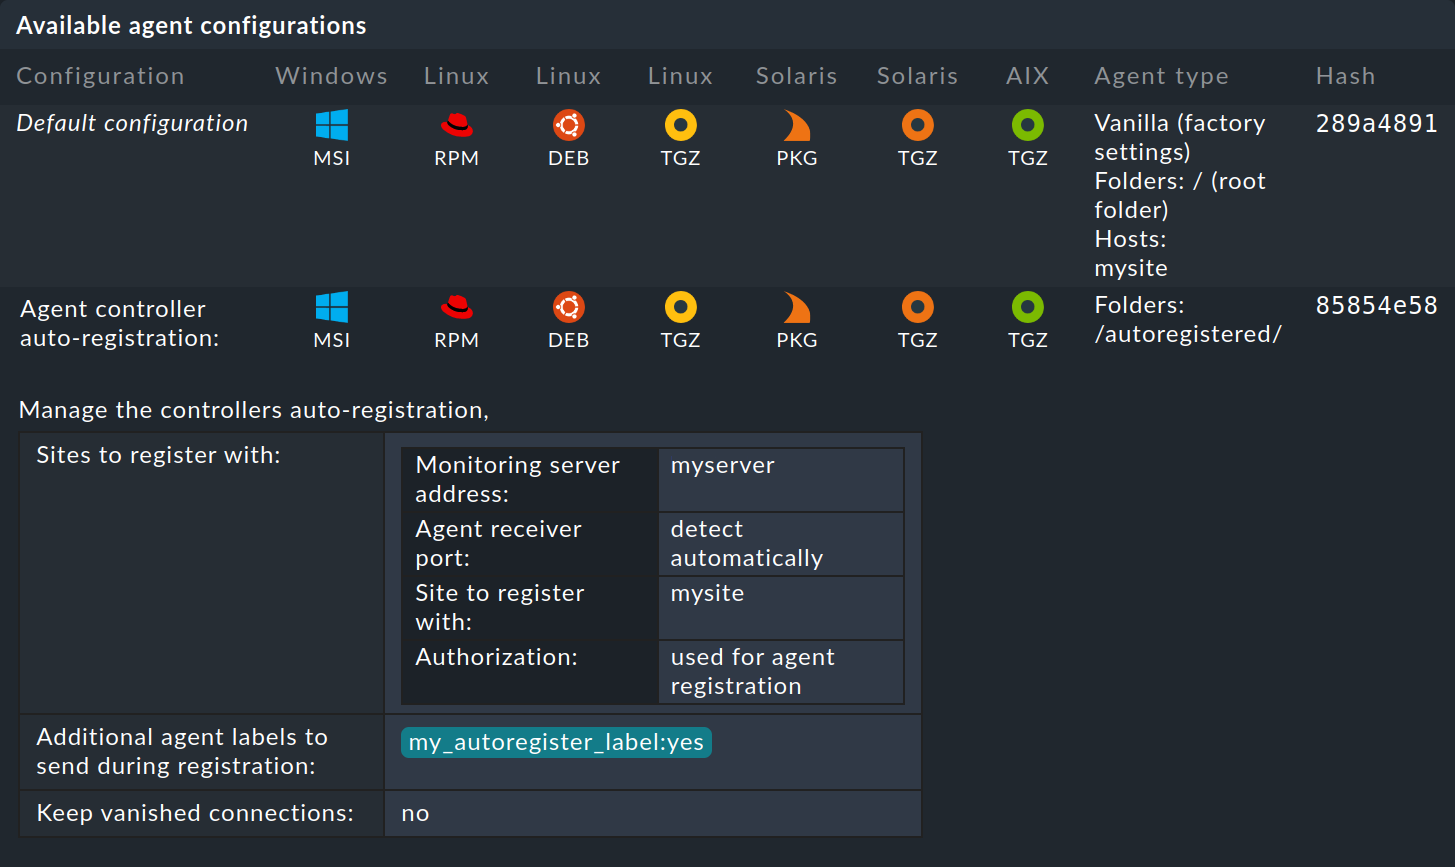 List with the new configurations of agents for auto-registration.